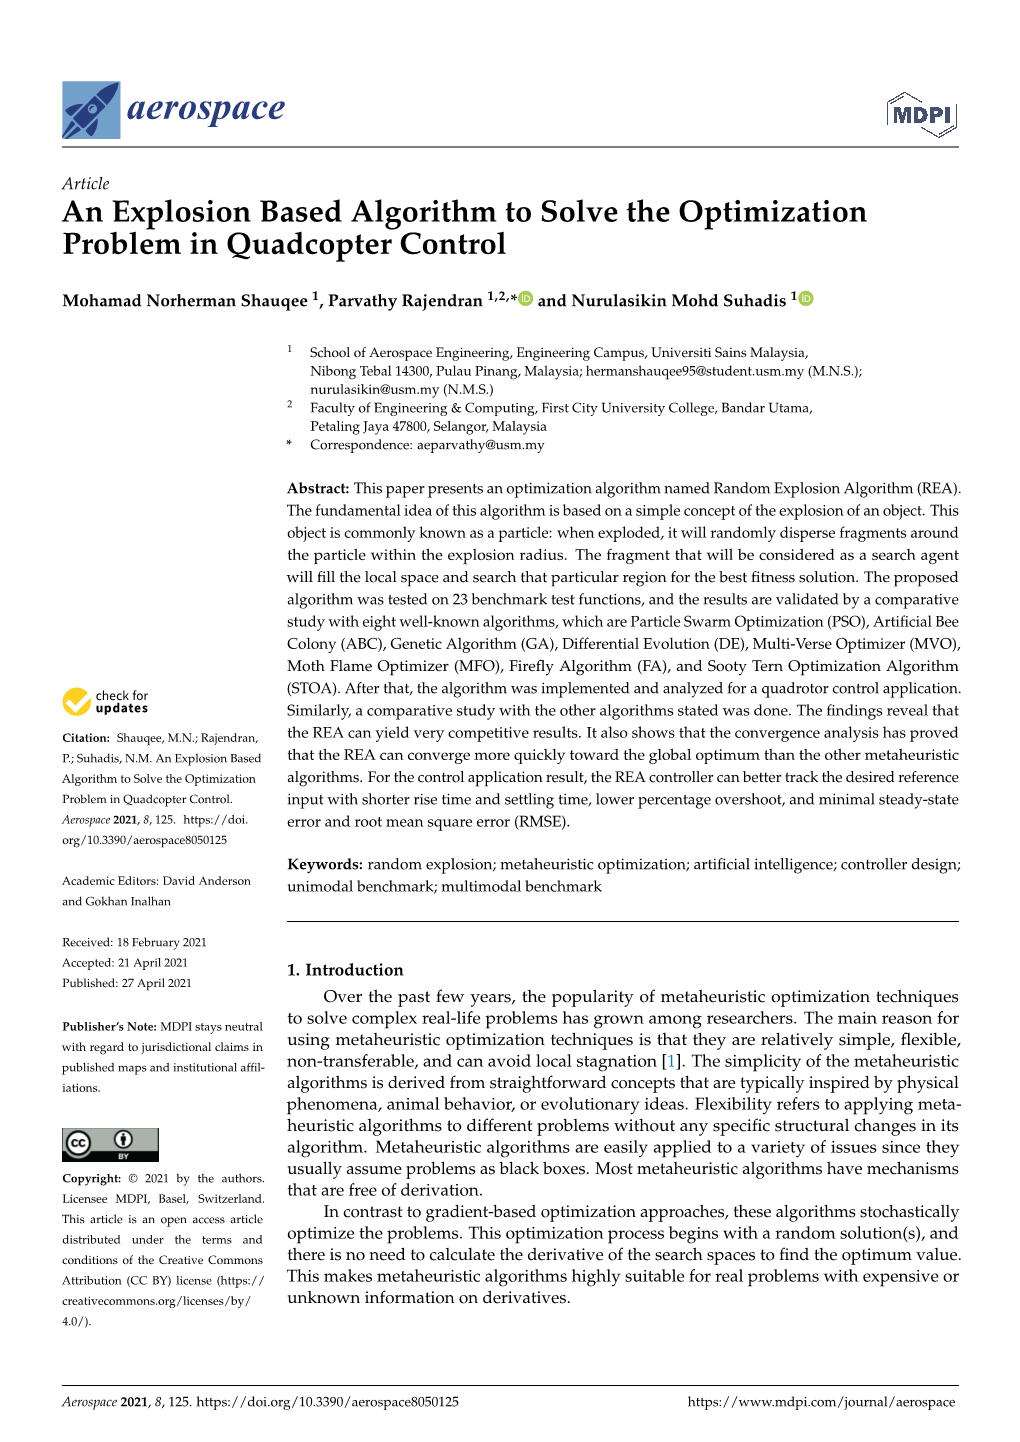 An Explosion Based Algorithm to Solve the Optimization Problem in Quadcopter Control